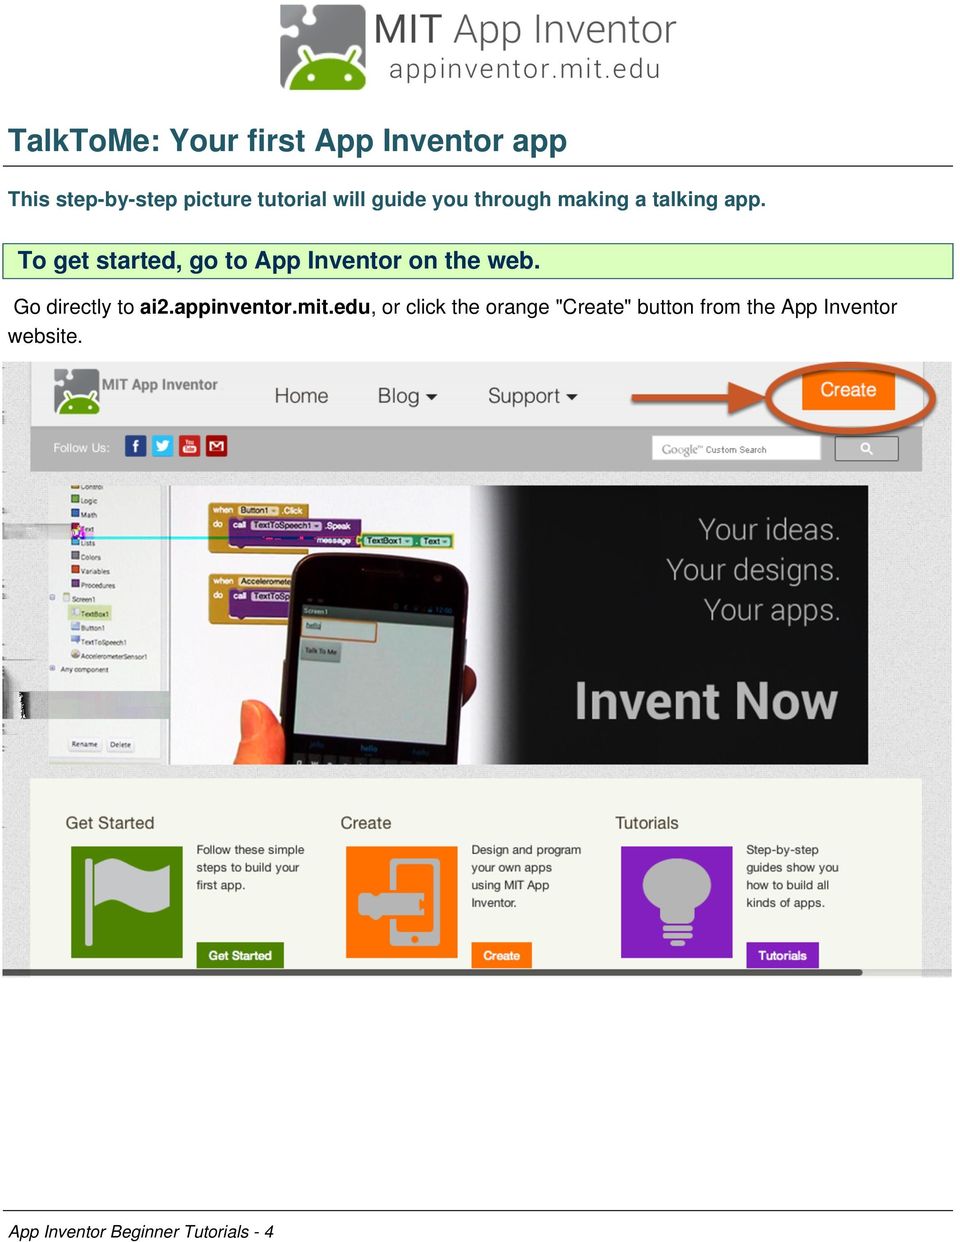 To get started, go to App Inventor on the web. Go directly to ai2.